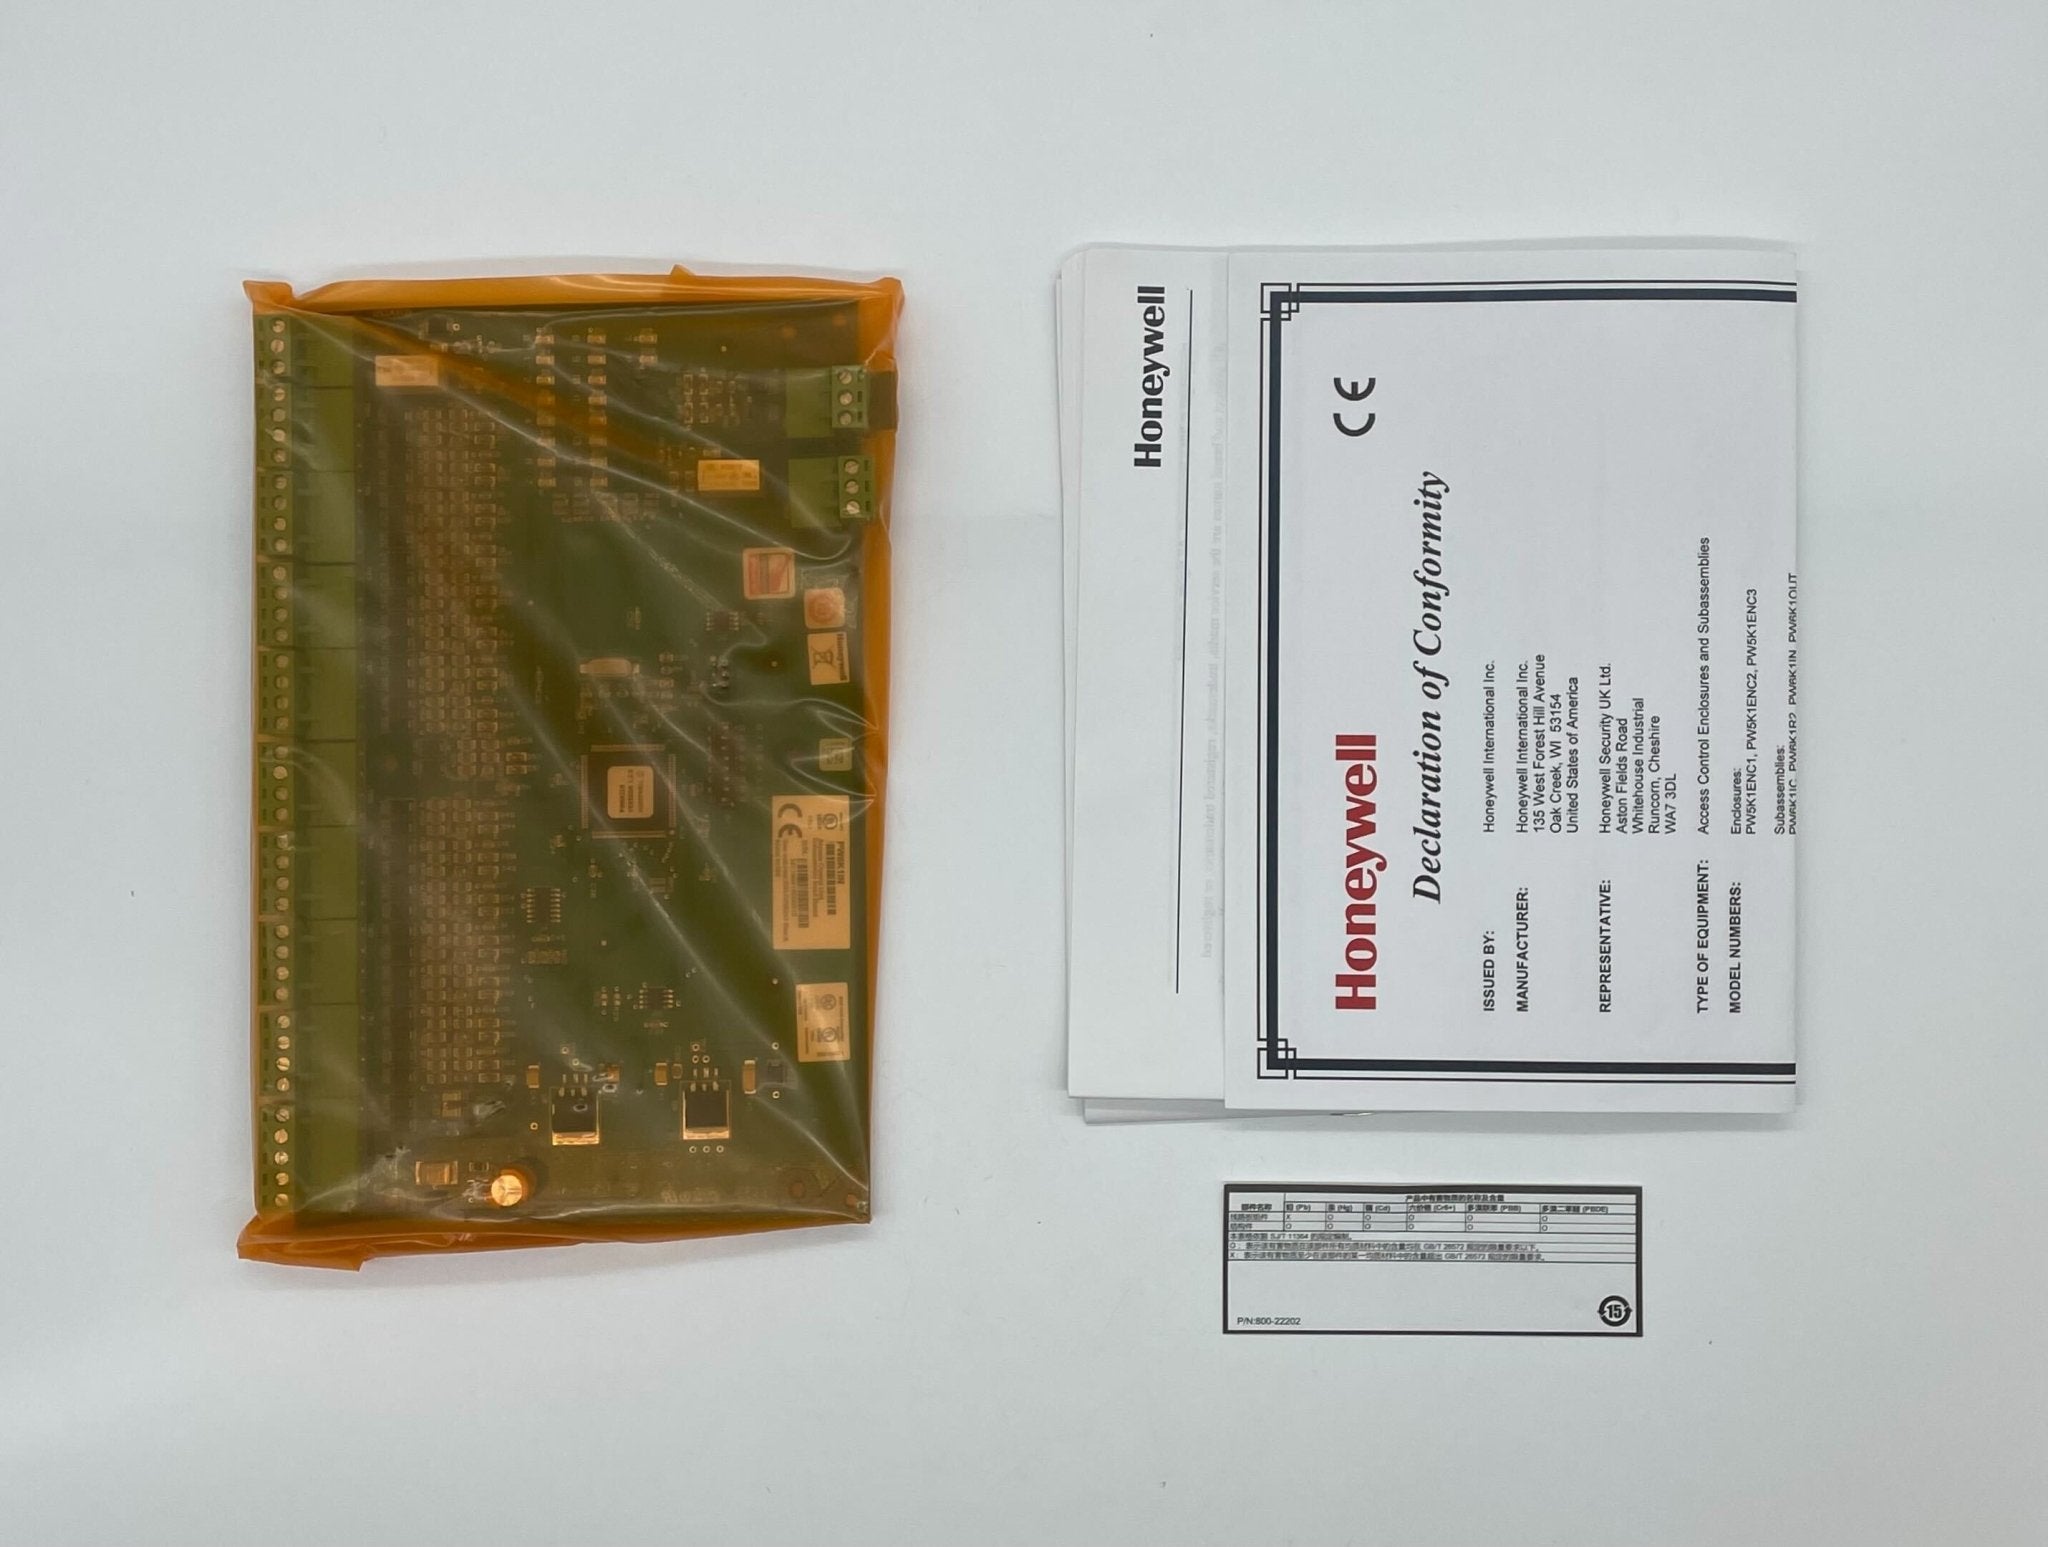 Honeywell PW6K1in - The Fire Alarm Supplier